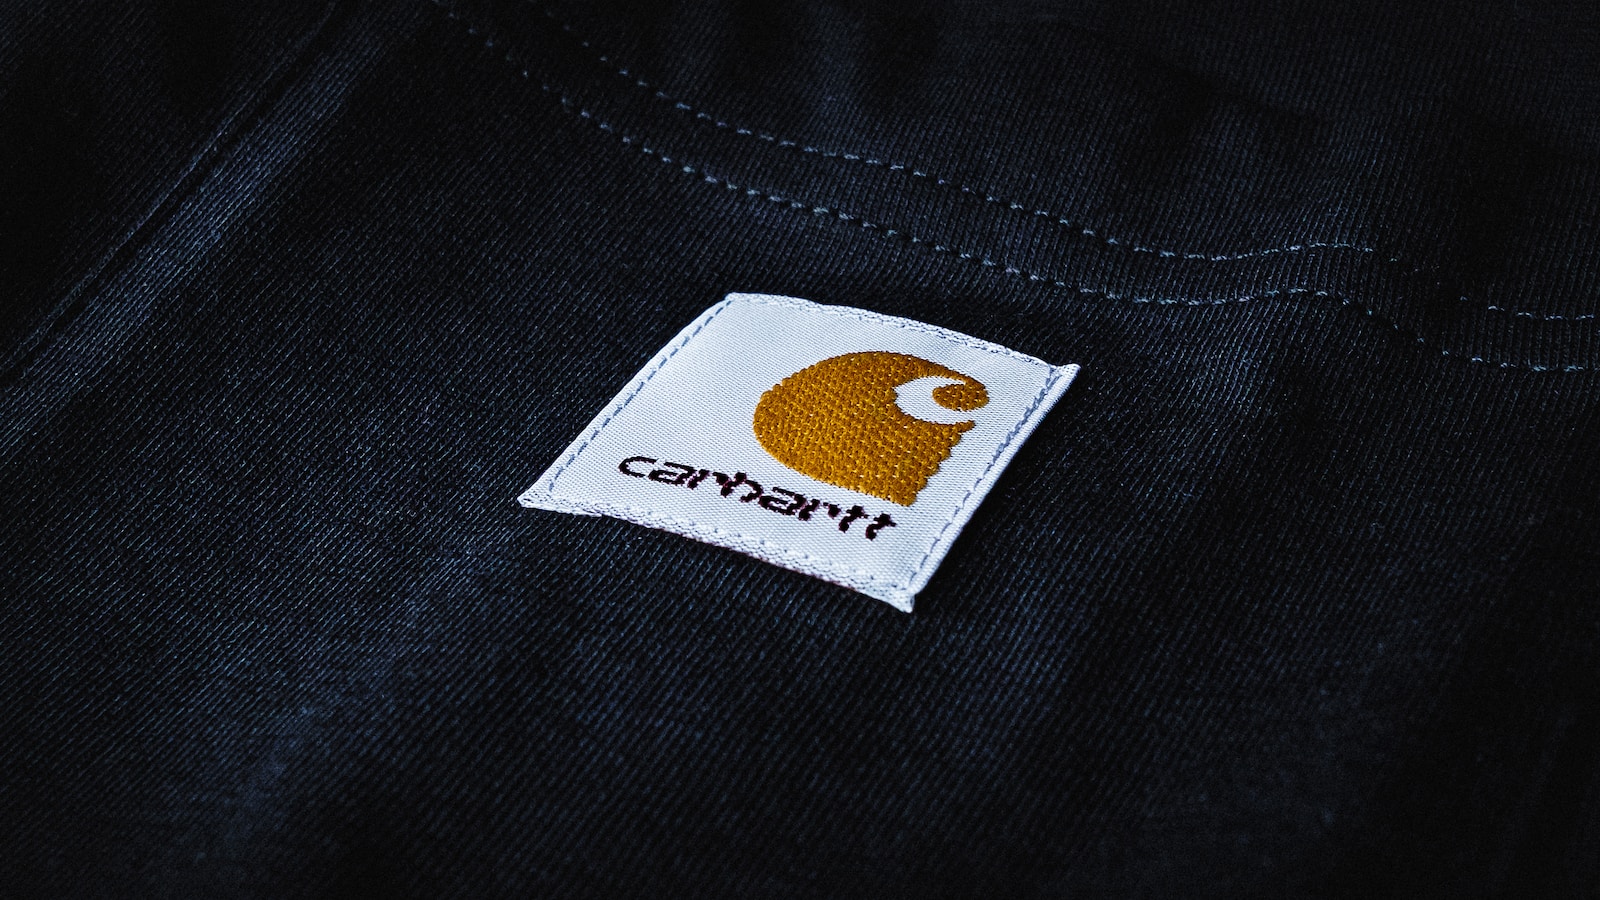 Iconic ownership. Carhartt. Aesthetic perfection.